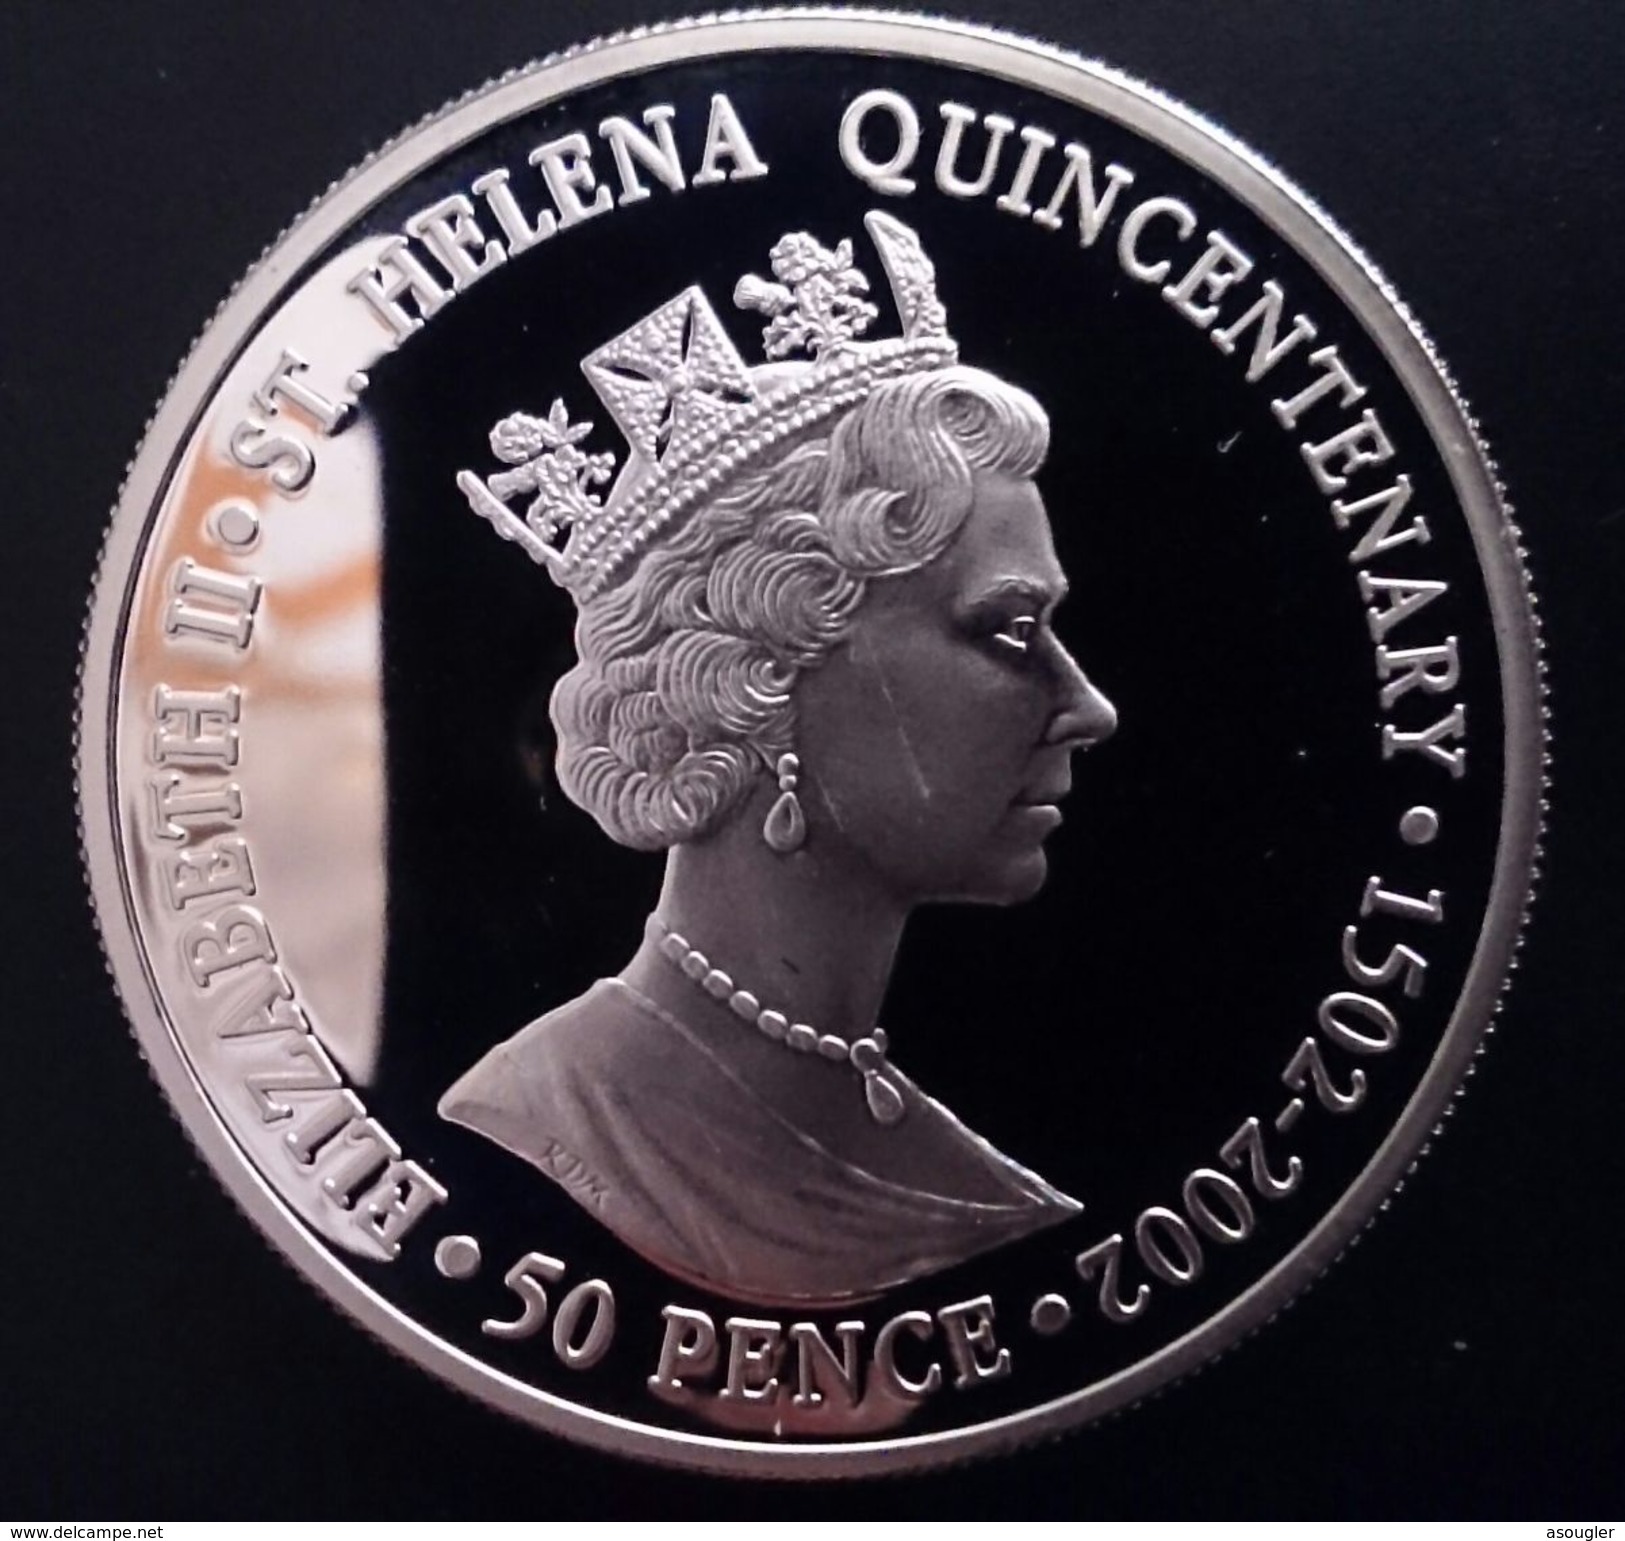 Saint Helena Island 50 Pence 2002 Silver Proof "1502-2002 Quincentenary Royal Visit" Free Shipping Via Registered - St. Helena